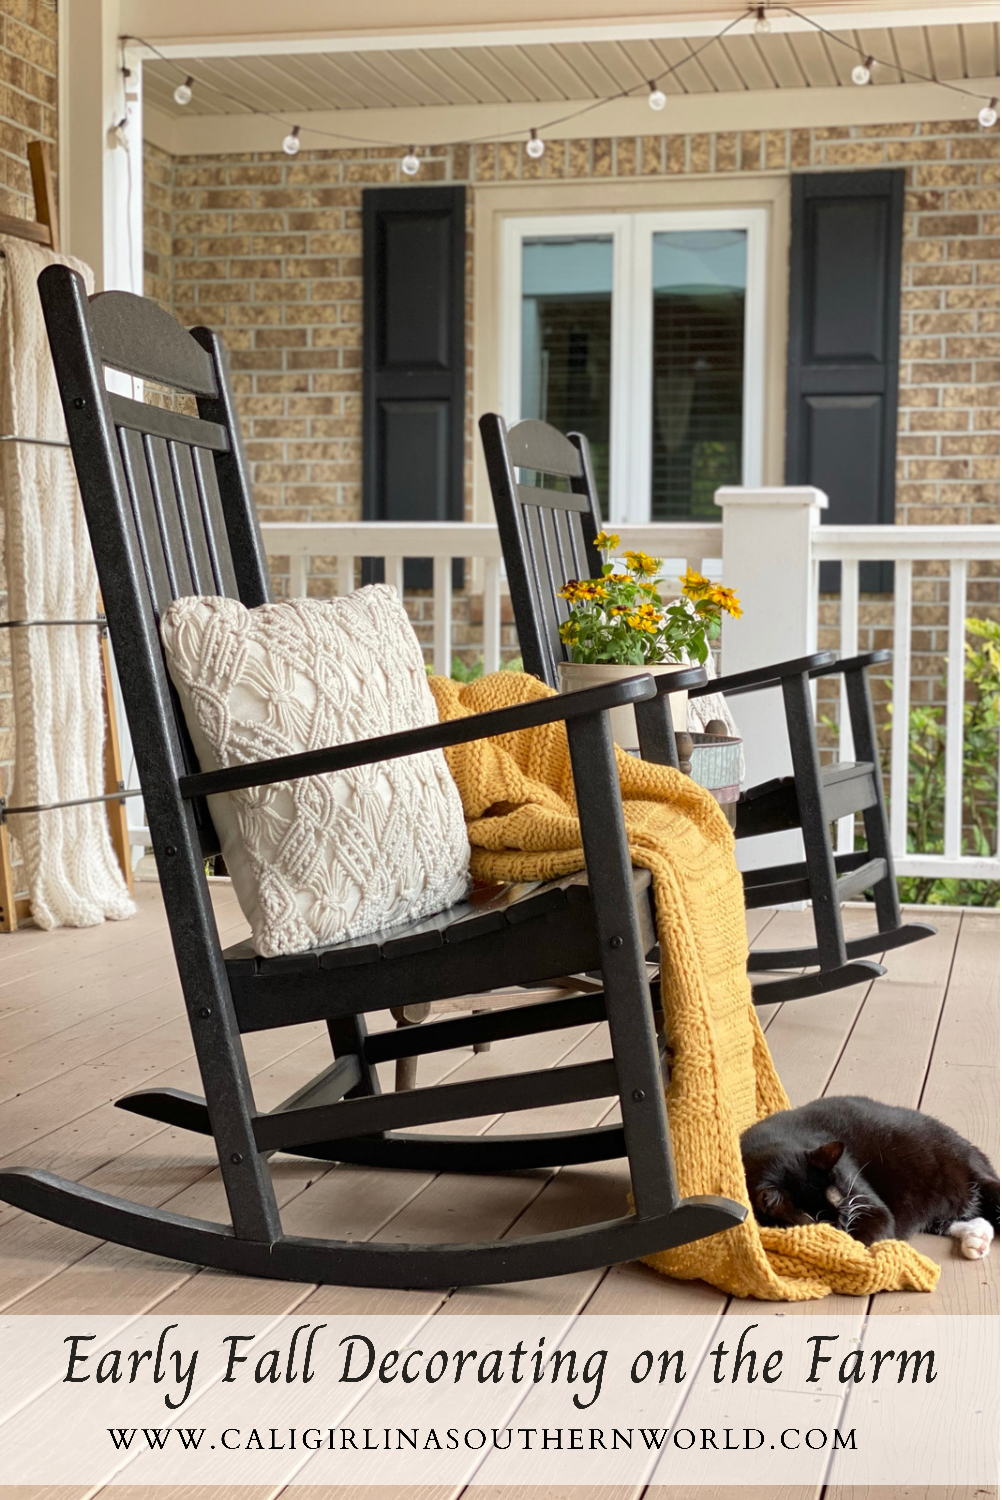 Pinterest Pin of two black rocking chairs on the front porch. One has a cream macrame pillow and a muted gold knit blanket on it. In front of the rocker is a black cat napping.